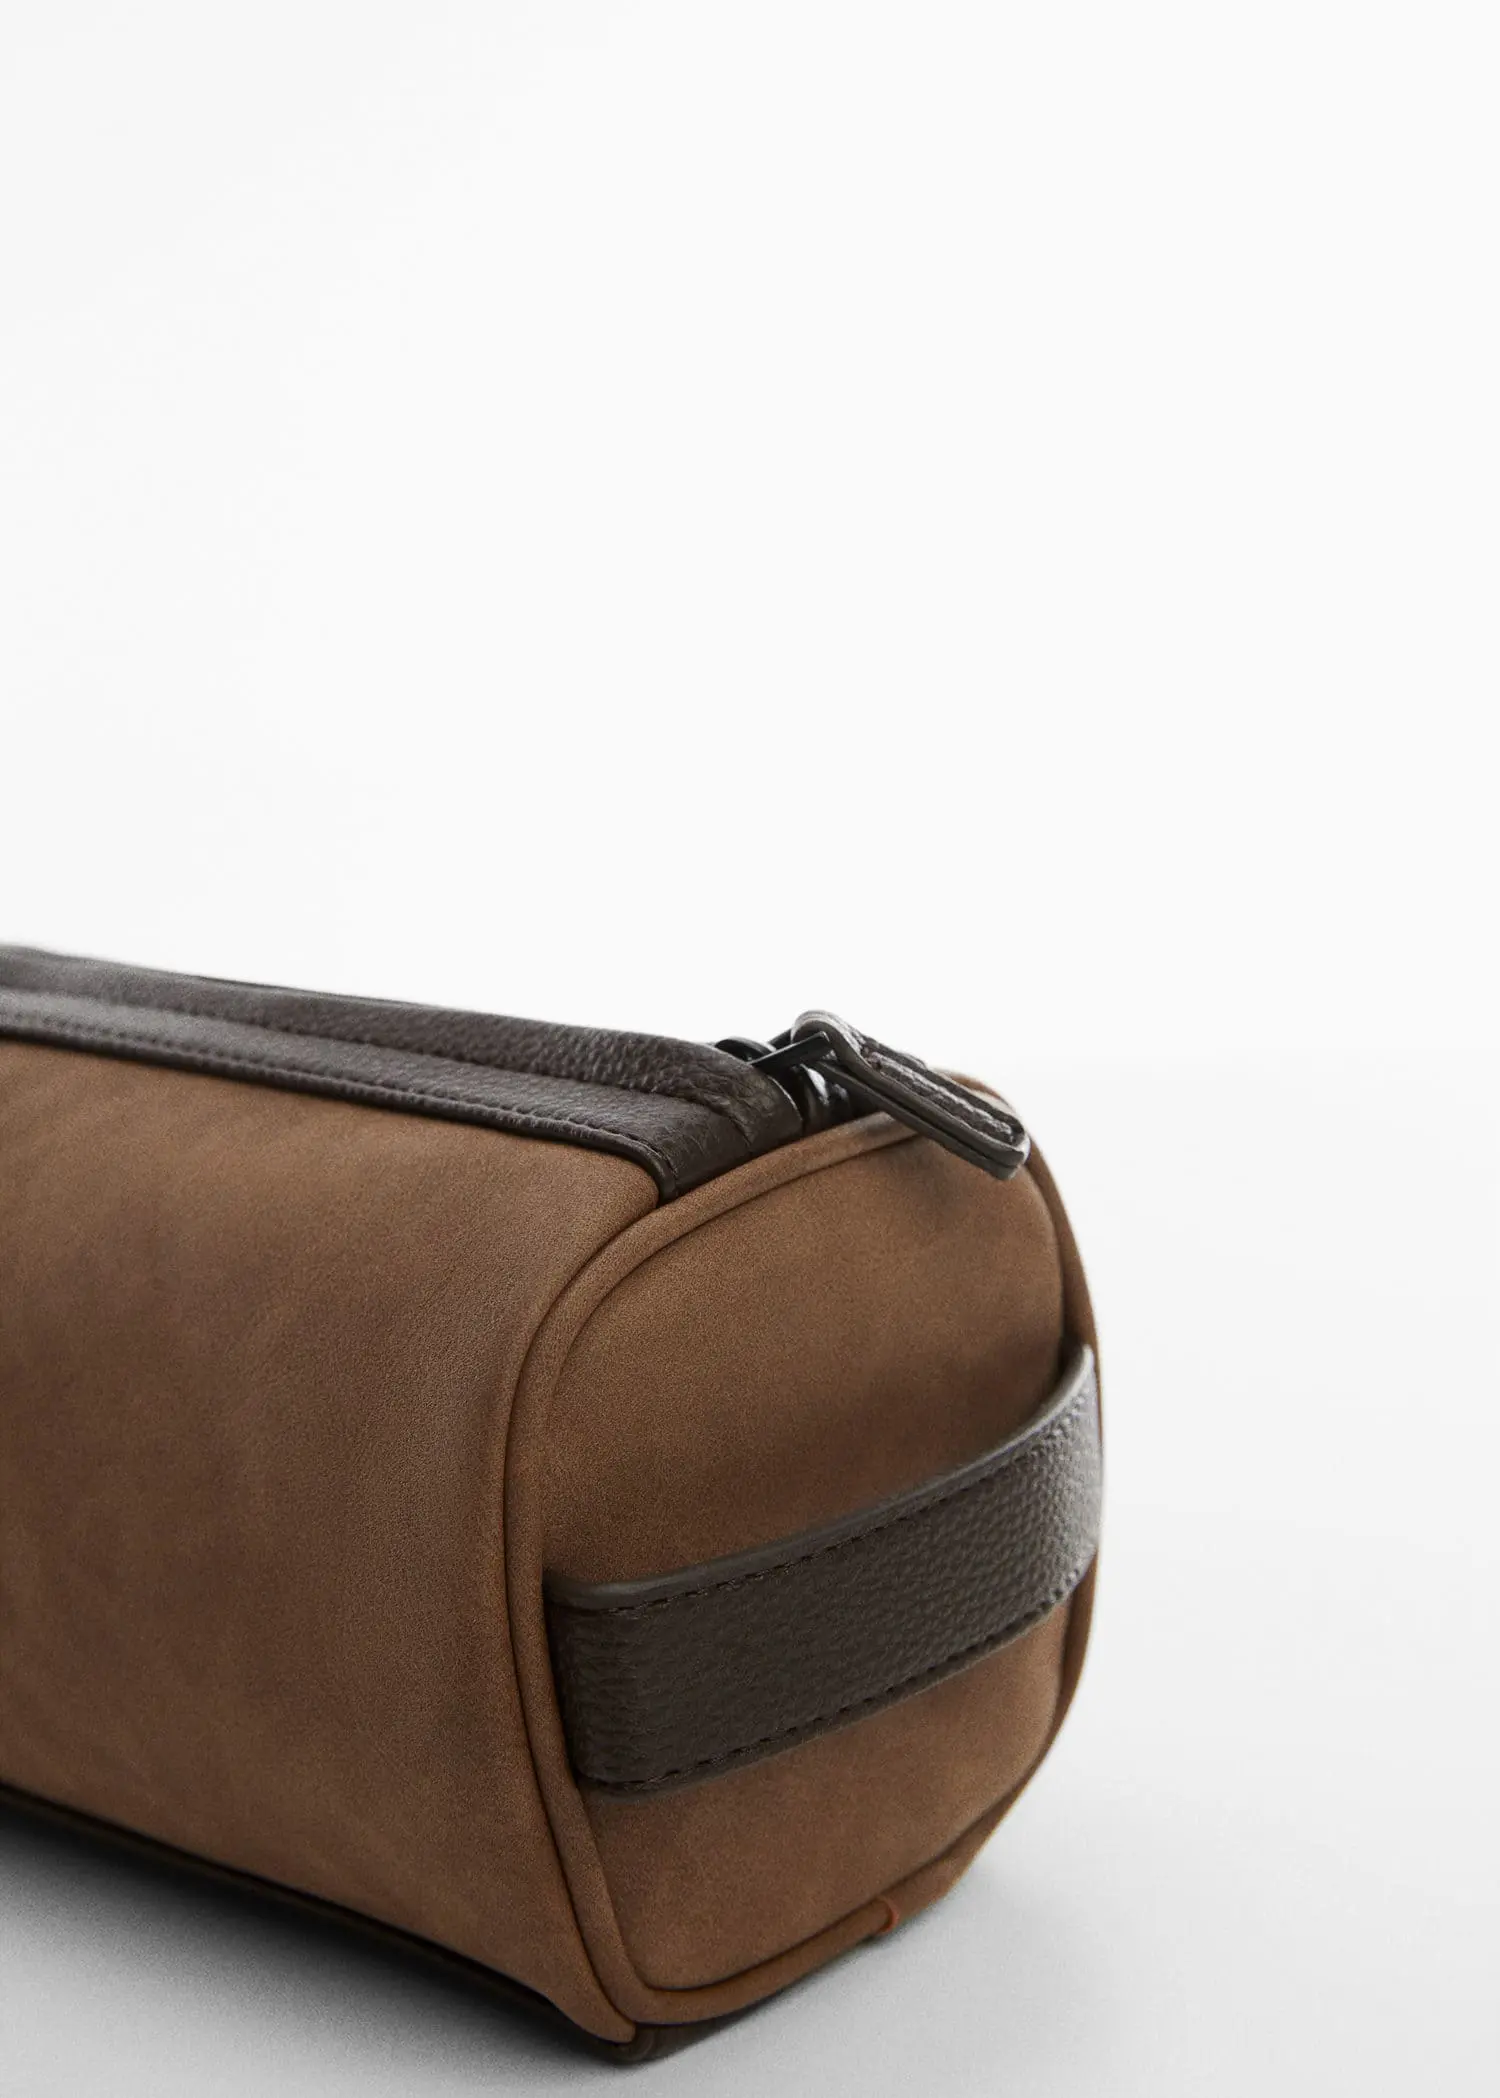 Mango Pebbled leather-effect toiletry bag. 3